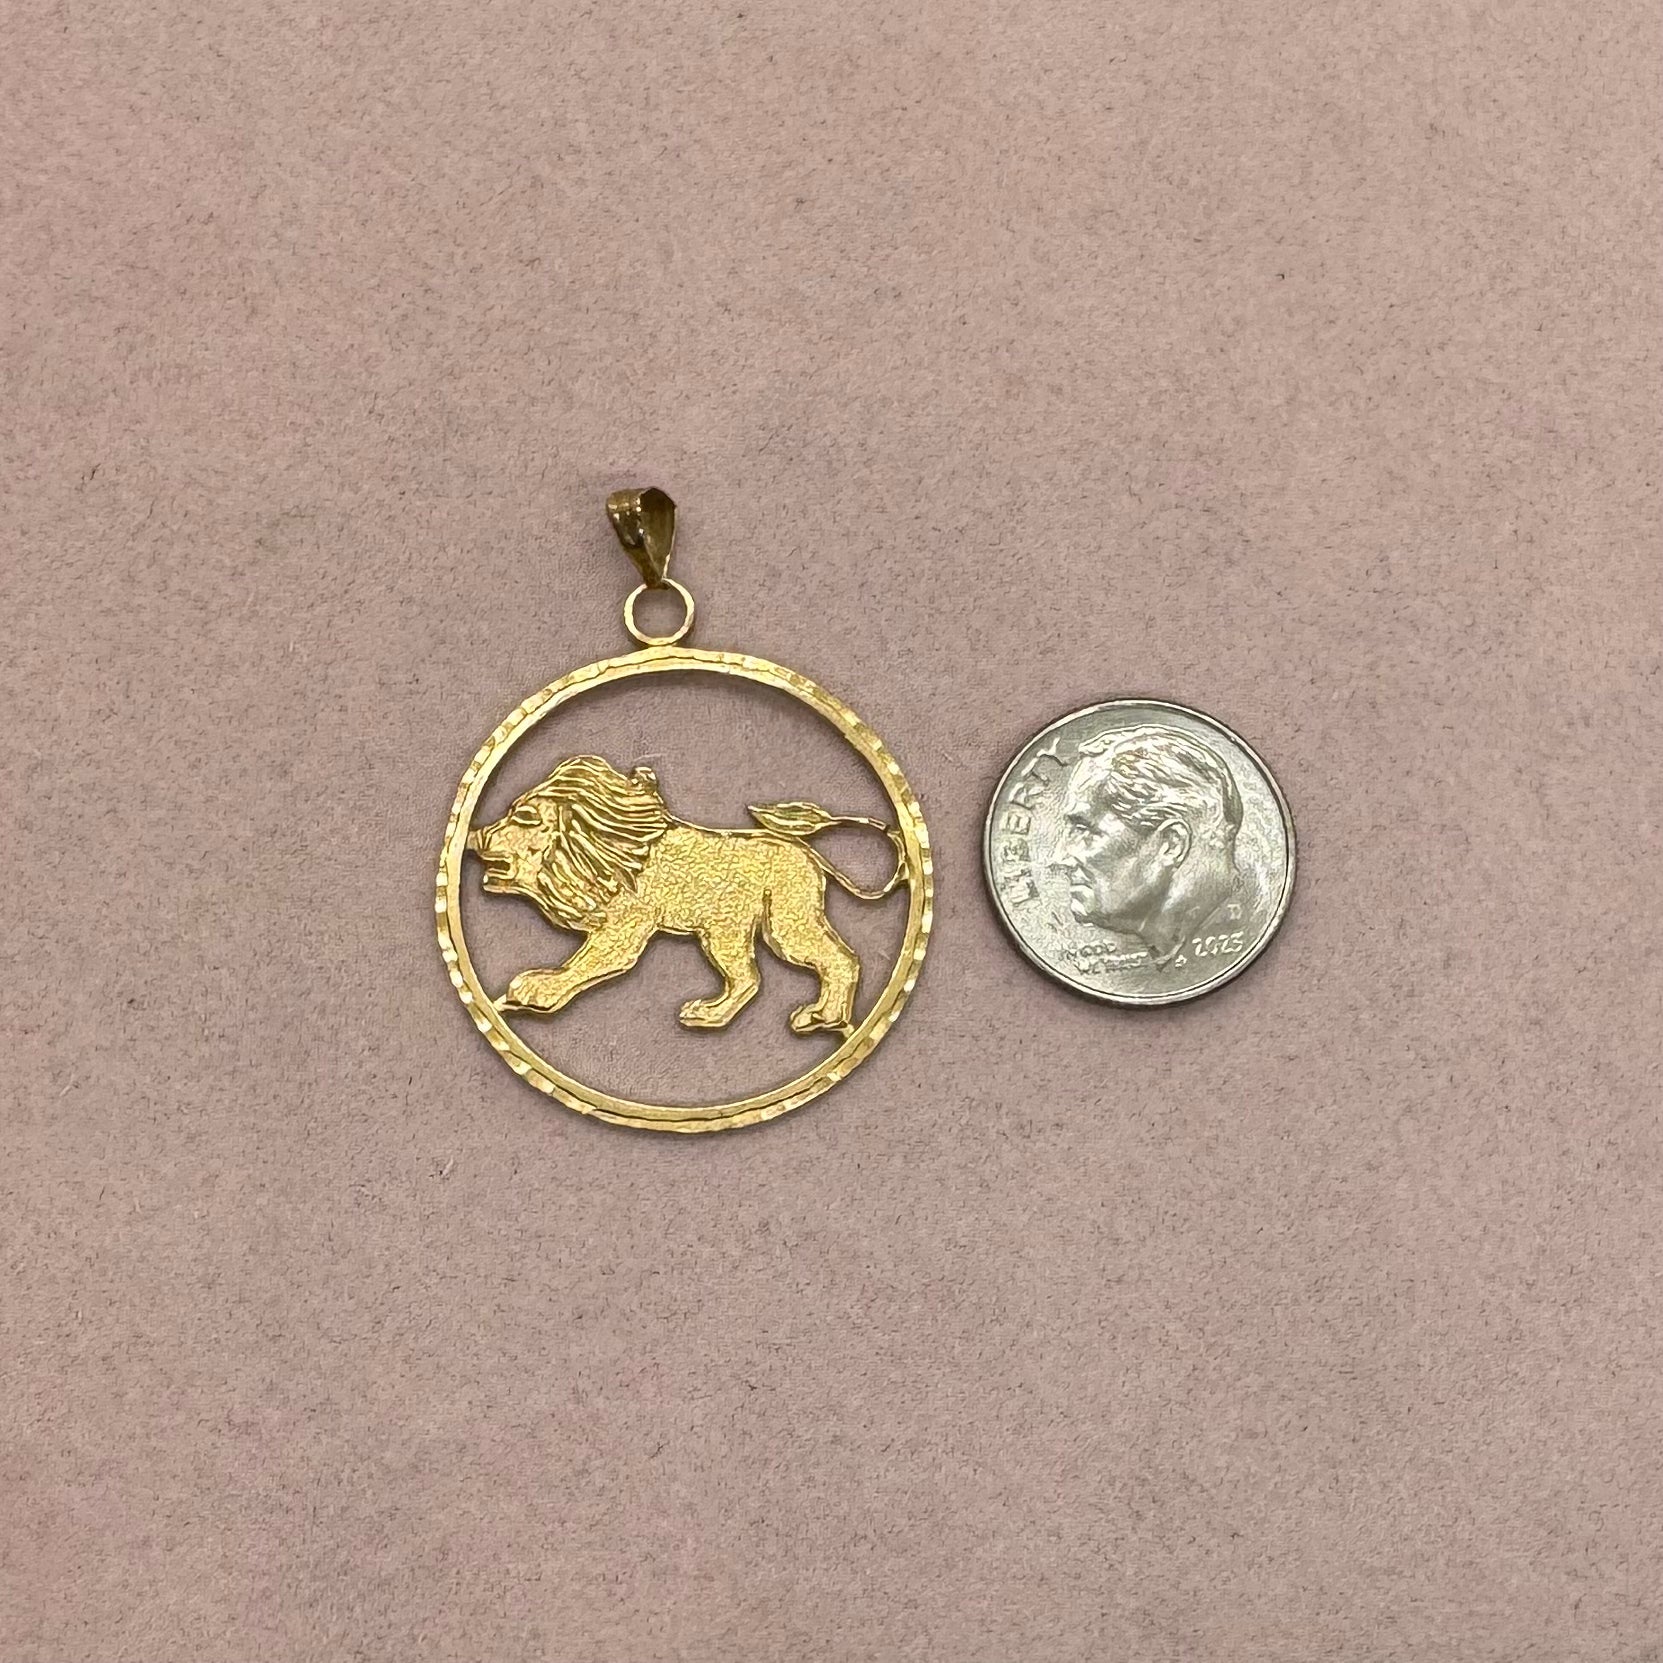 Leo / Lion Medallion with Engraving